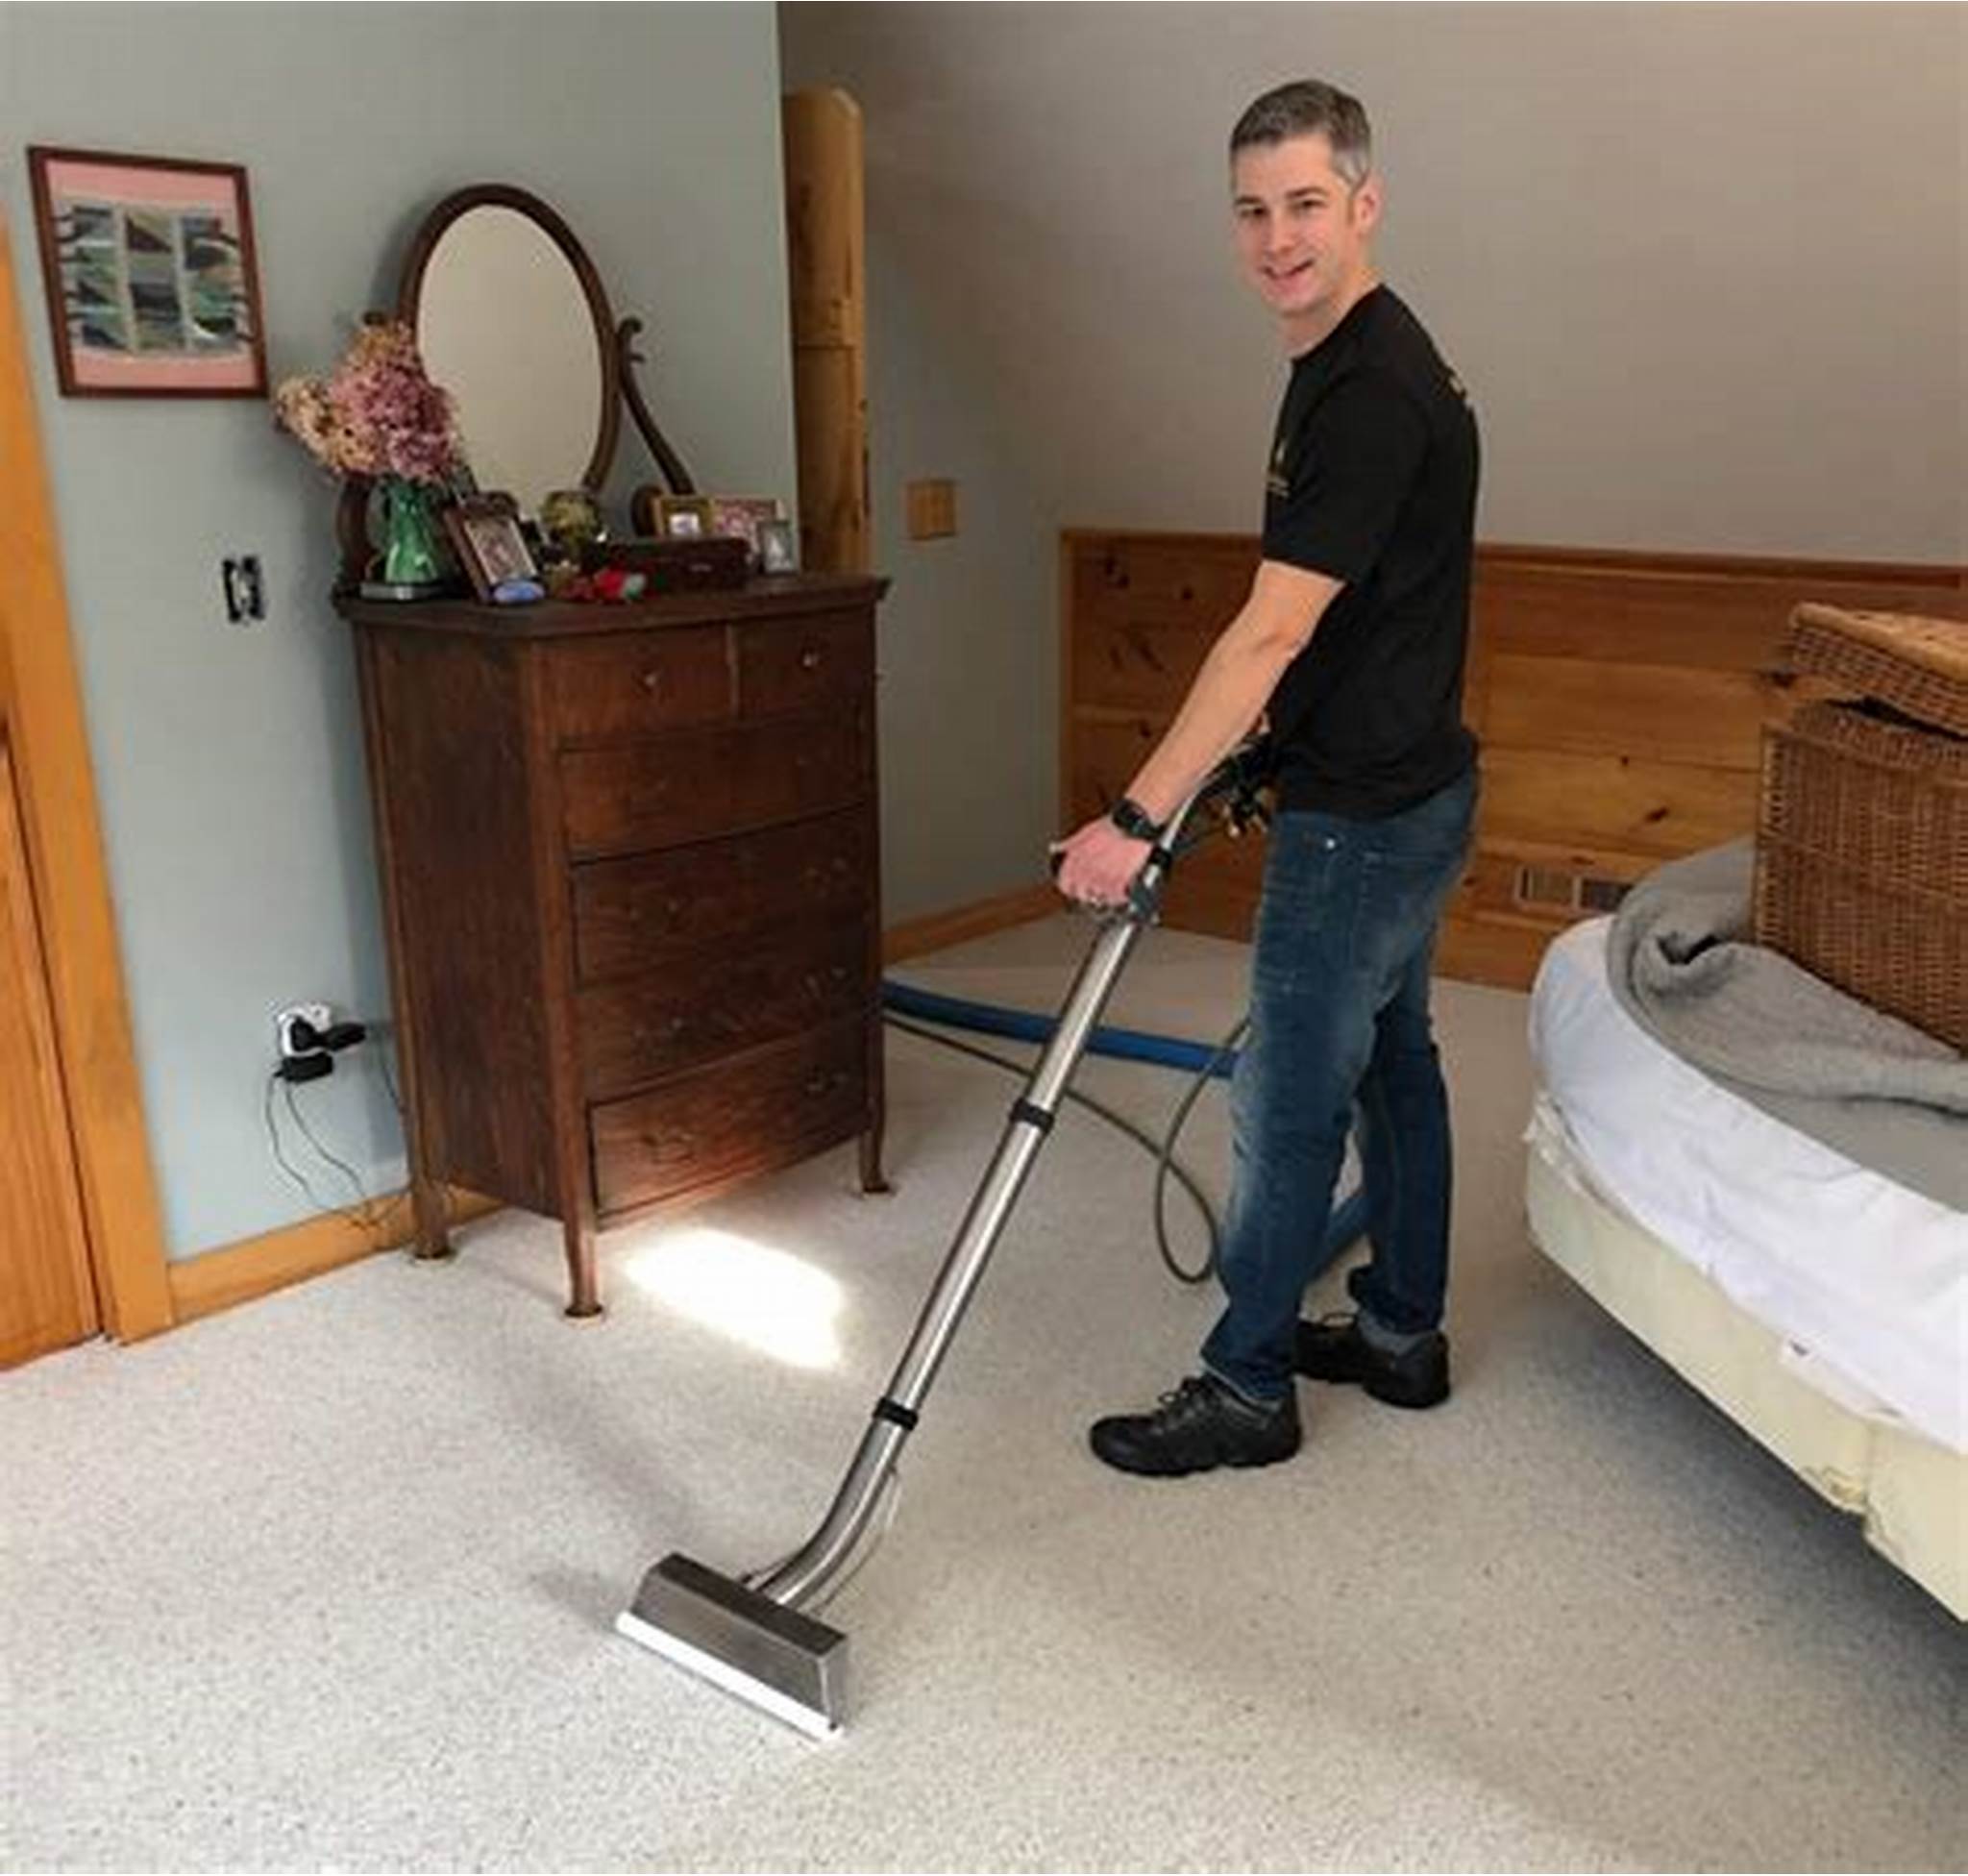 Carpet Cleaning Prices